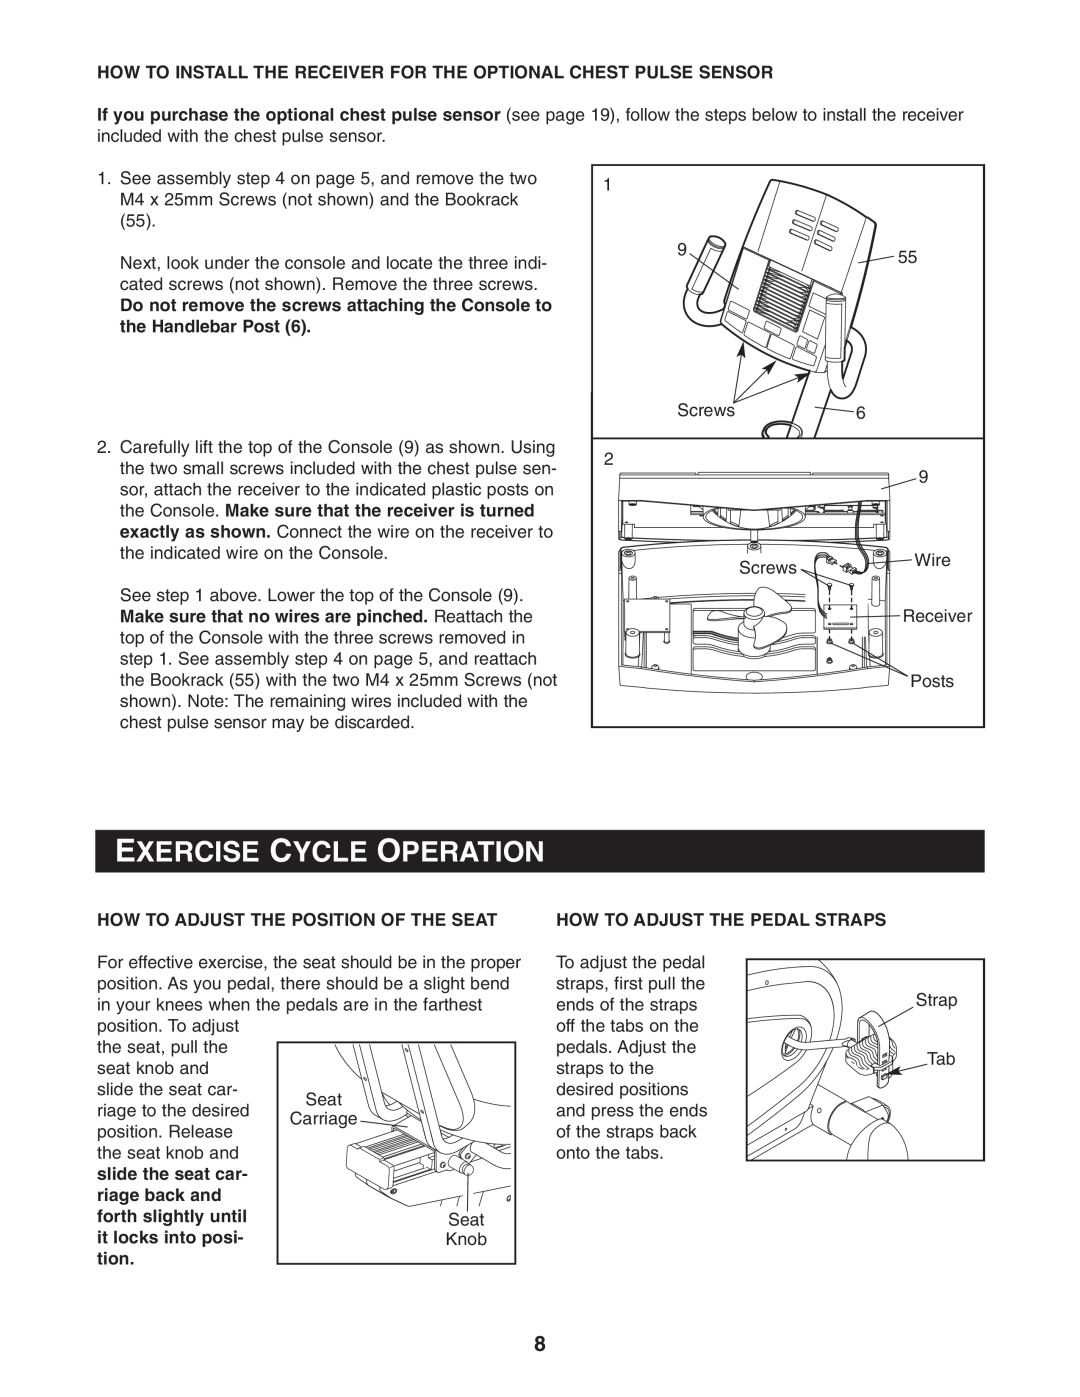 Reebok Fitness RBEX69740 manual Exercise Cycle Operation, How To Install The Receiver For The Optional Chest Pulse Sensor 